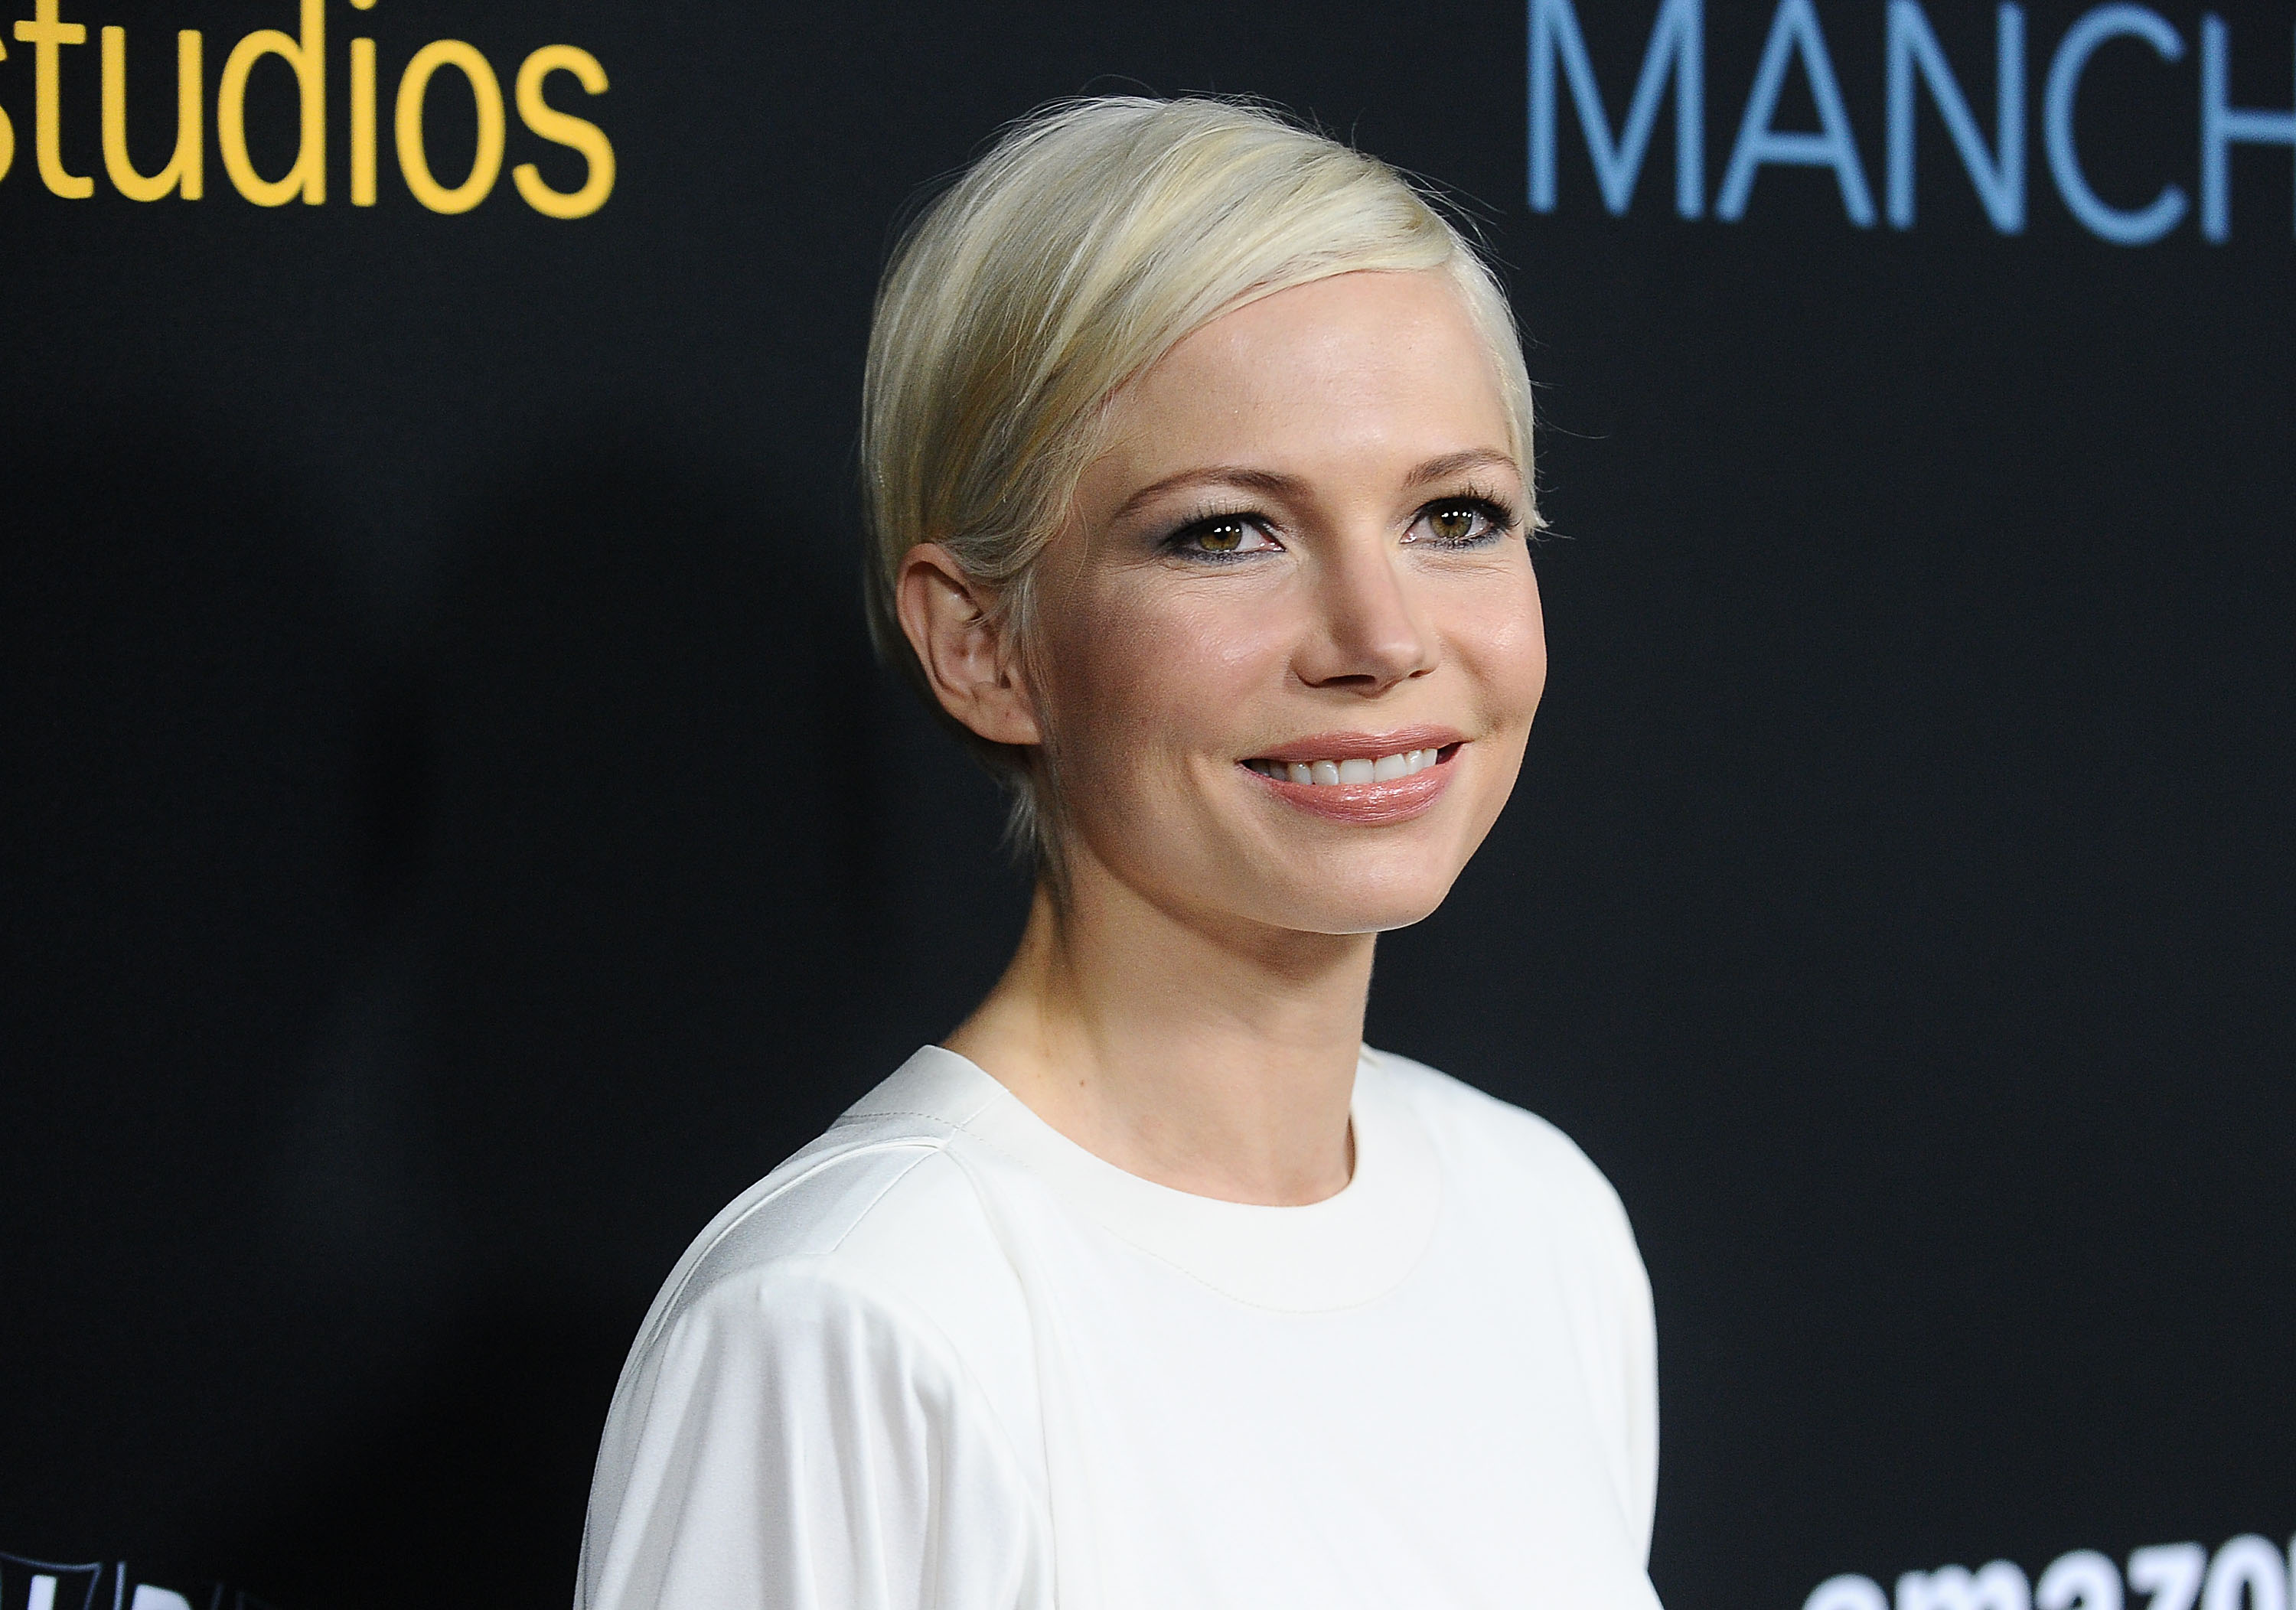 Actress Michelle Williams attends the premiere of "Manchester by the Sea" at Samuel Goldwyn Theater on November 14, 2016 in Beverly Hills, California. (Jason LaVeris&mdash;Getty Images)